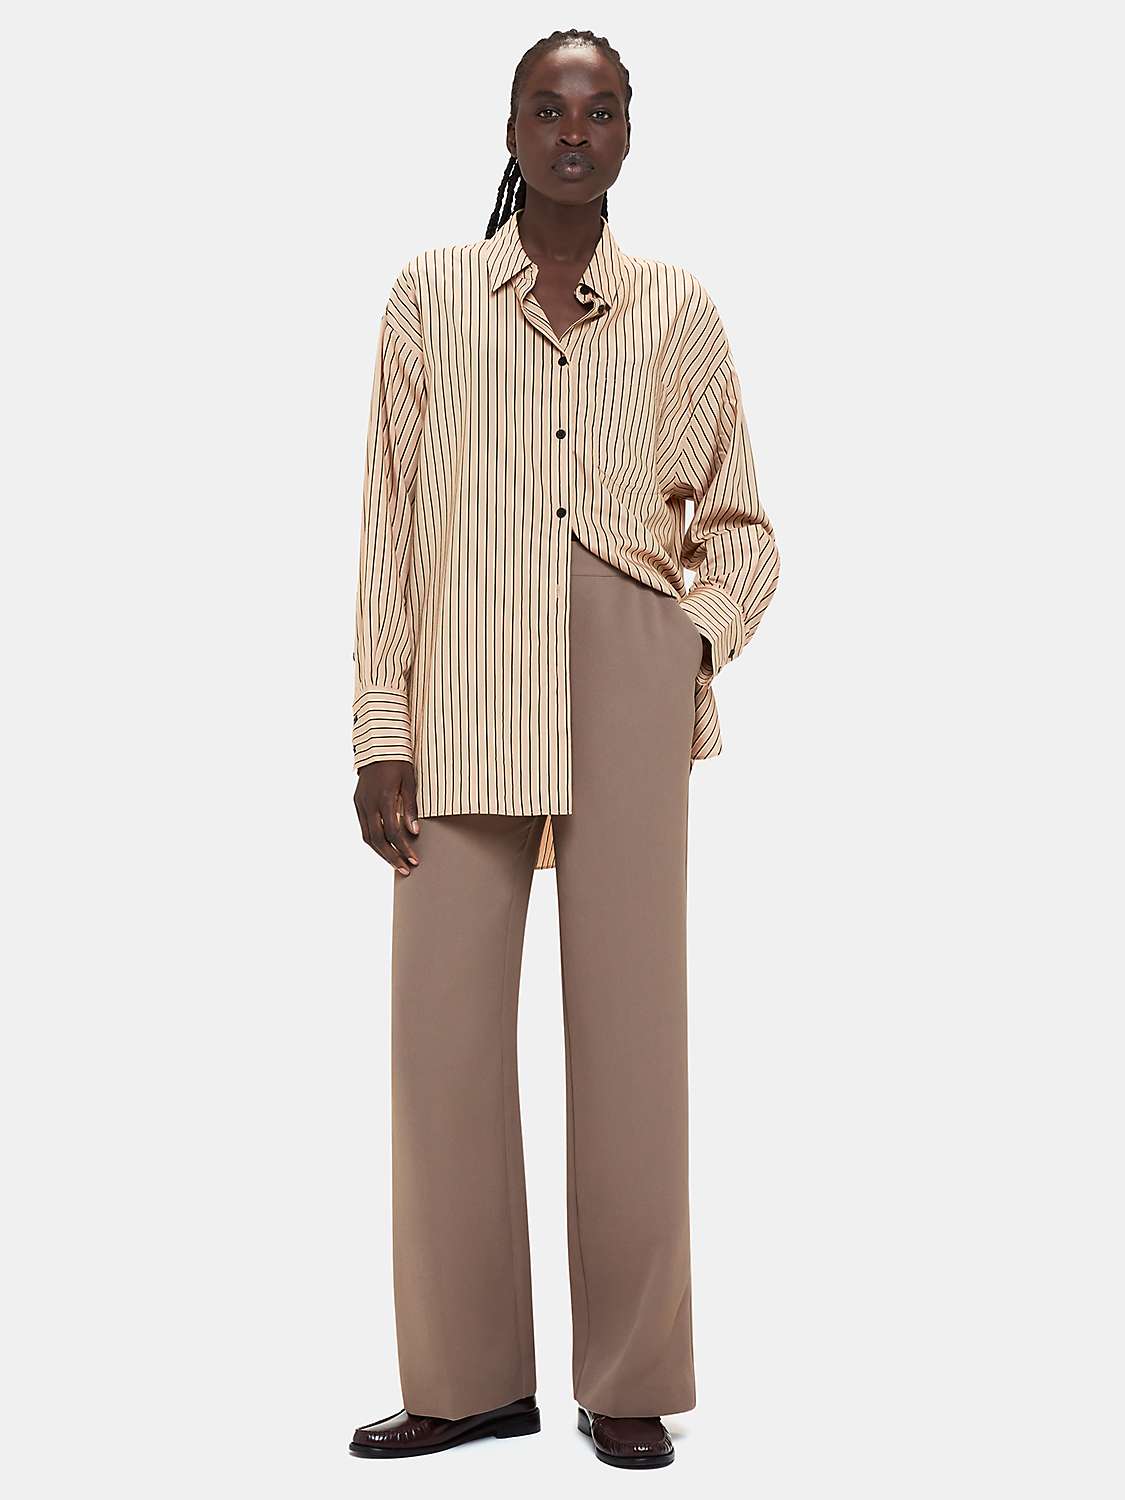 Buy Whistles Ultimate Full Length Wide Leg Trousers, Taupe Online at johnlewis.com